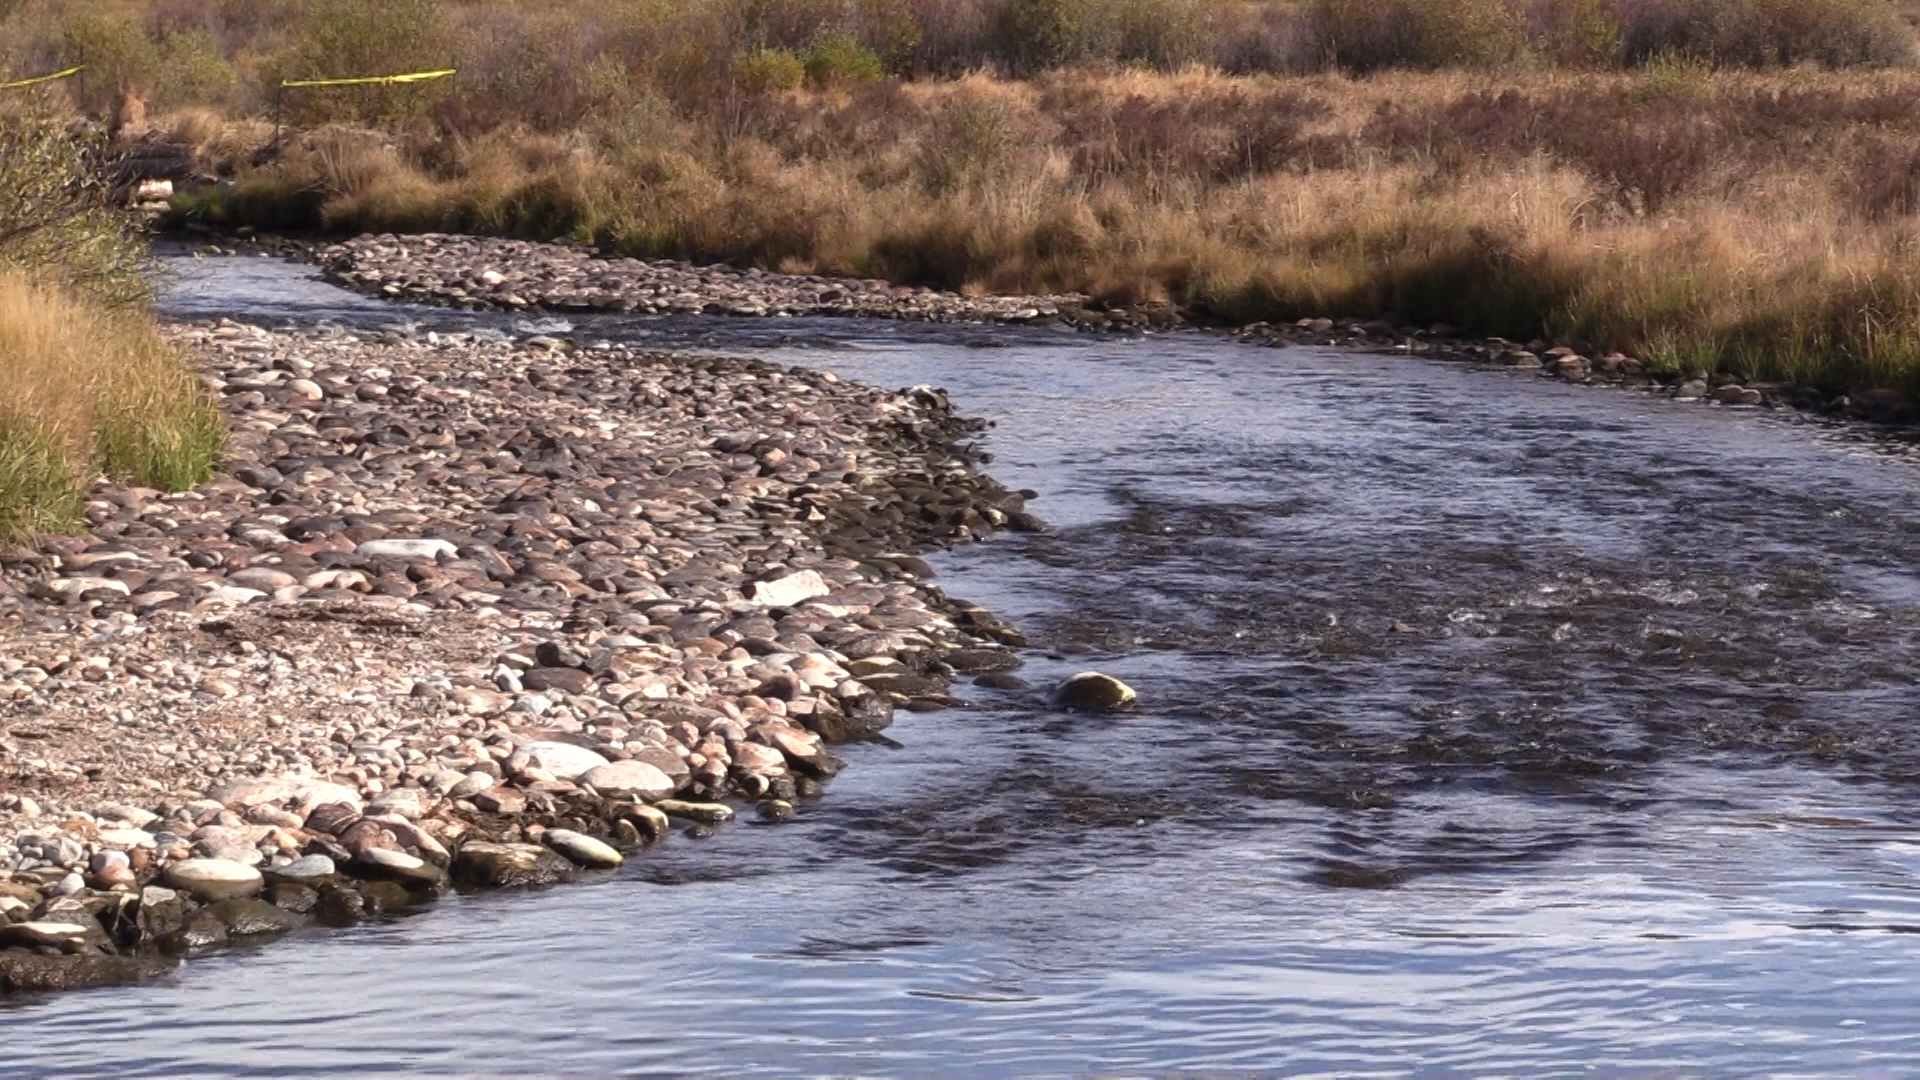 50 rock point bars were installed to channel water into the middle of the river during low-flow periods.